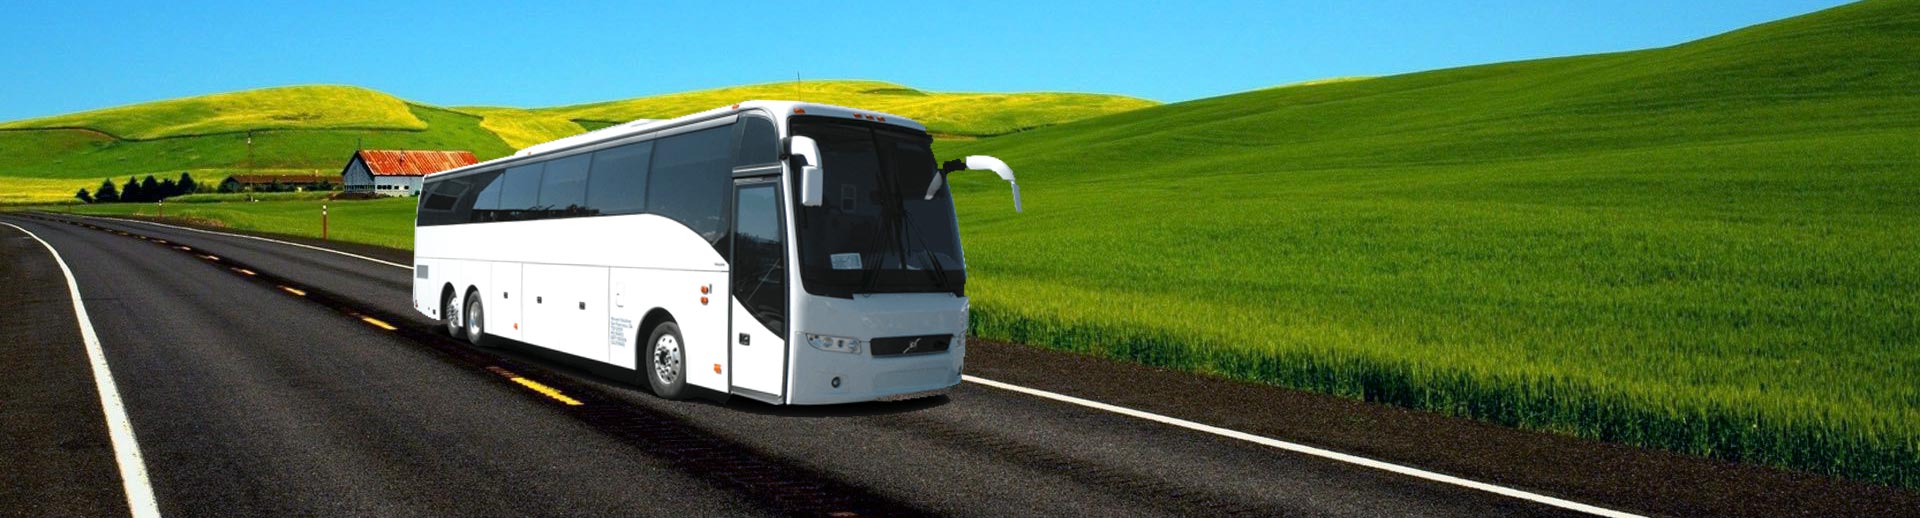 Online Bus Ticket Booking MR Travels And Logistics